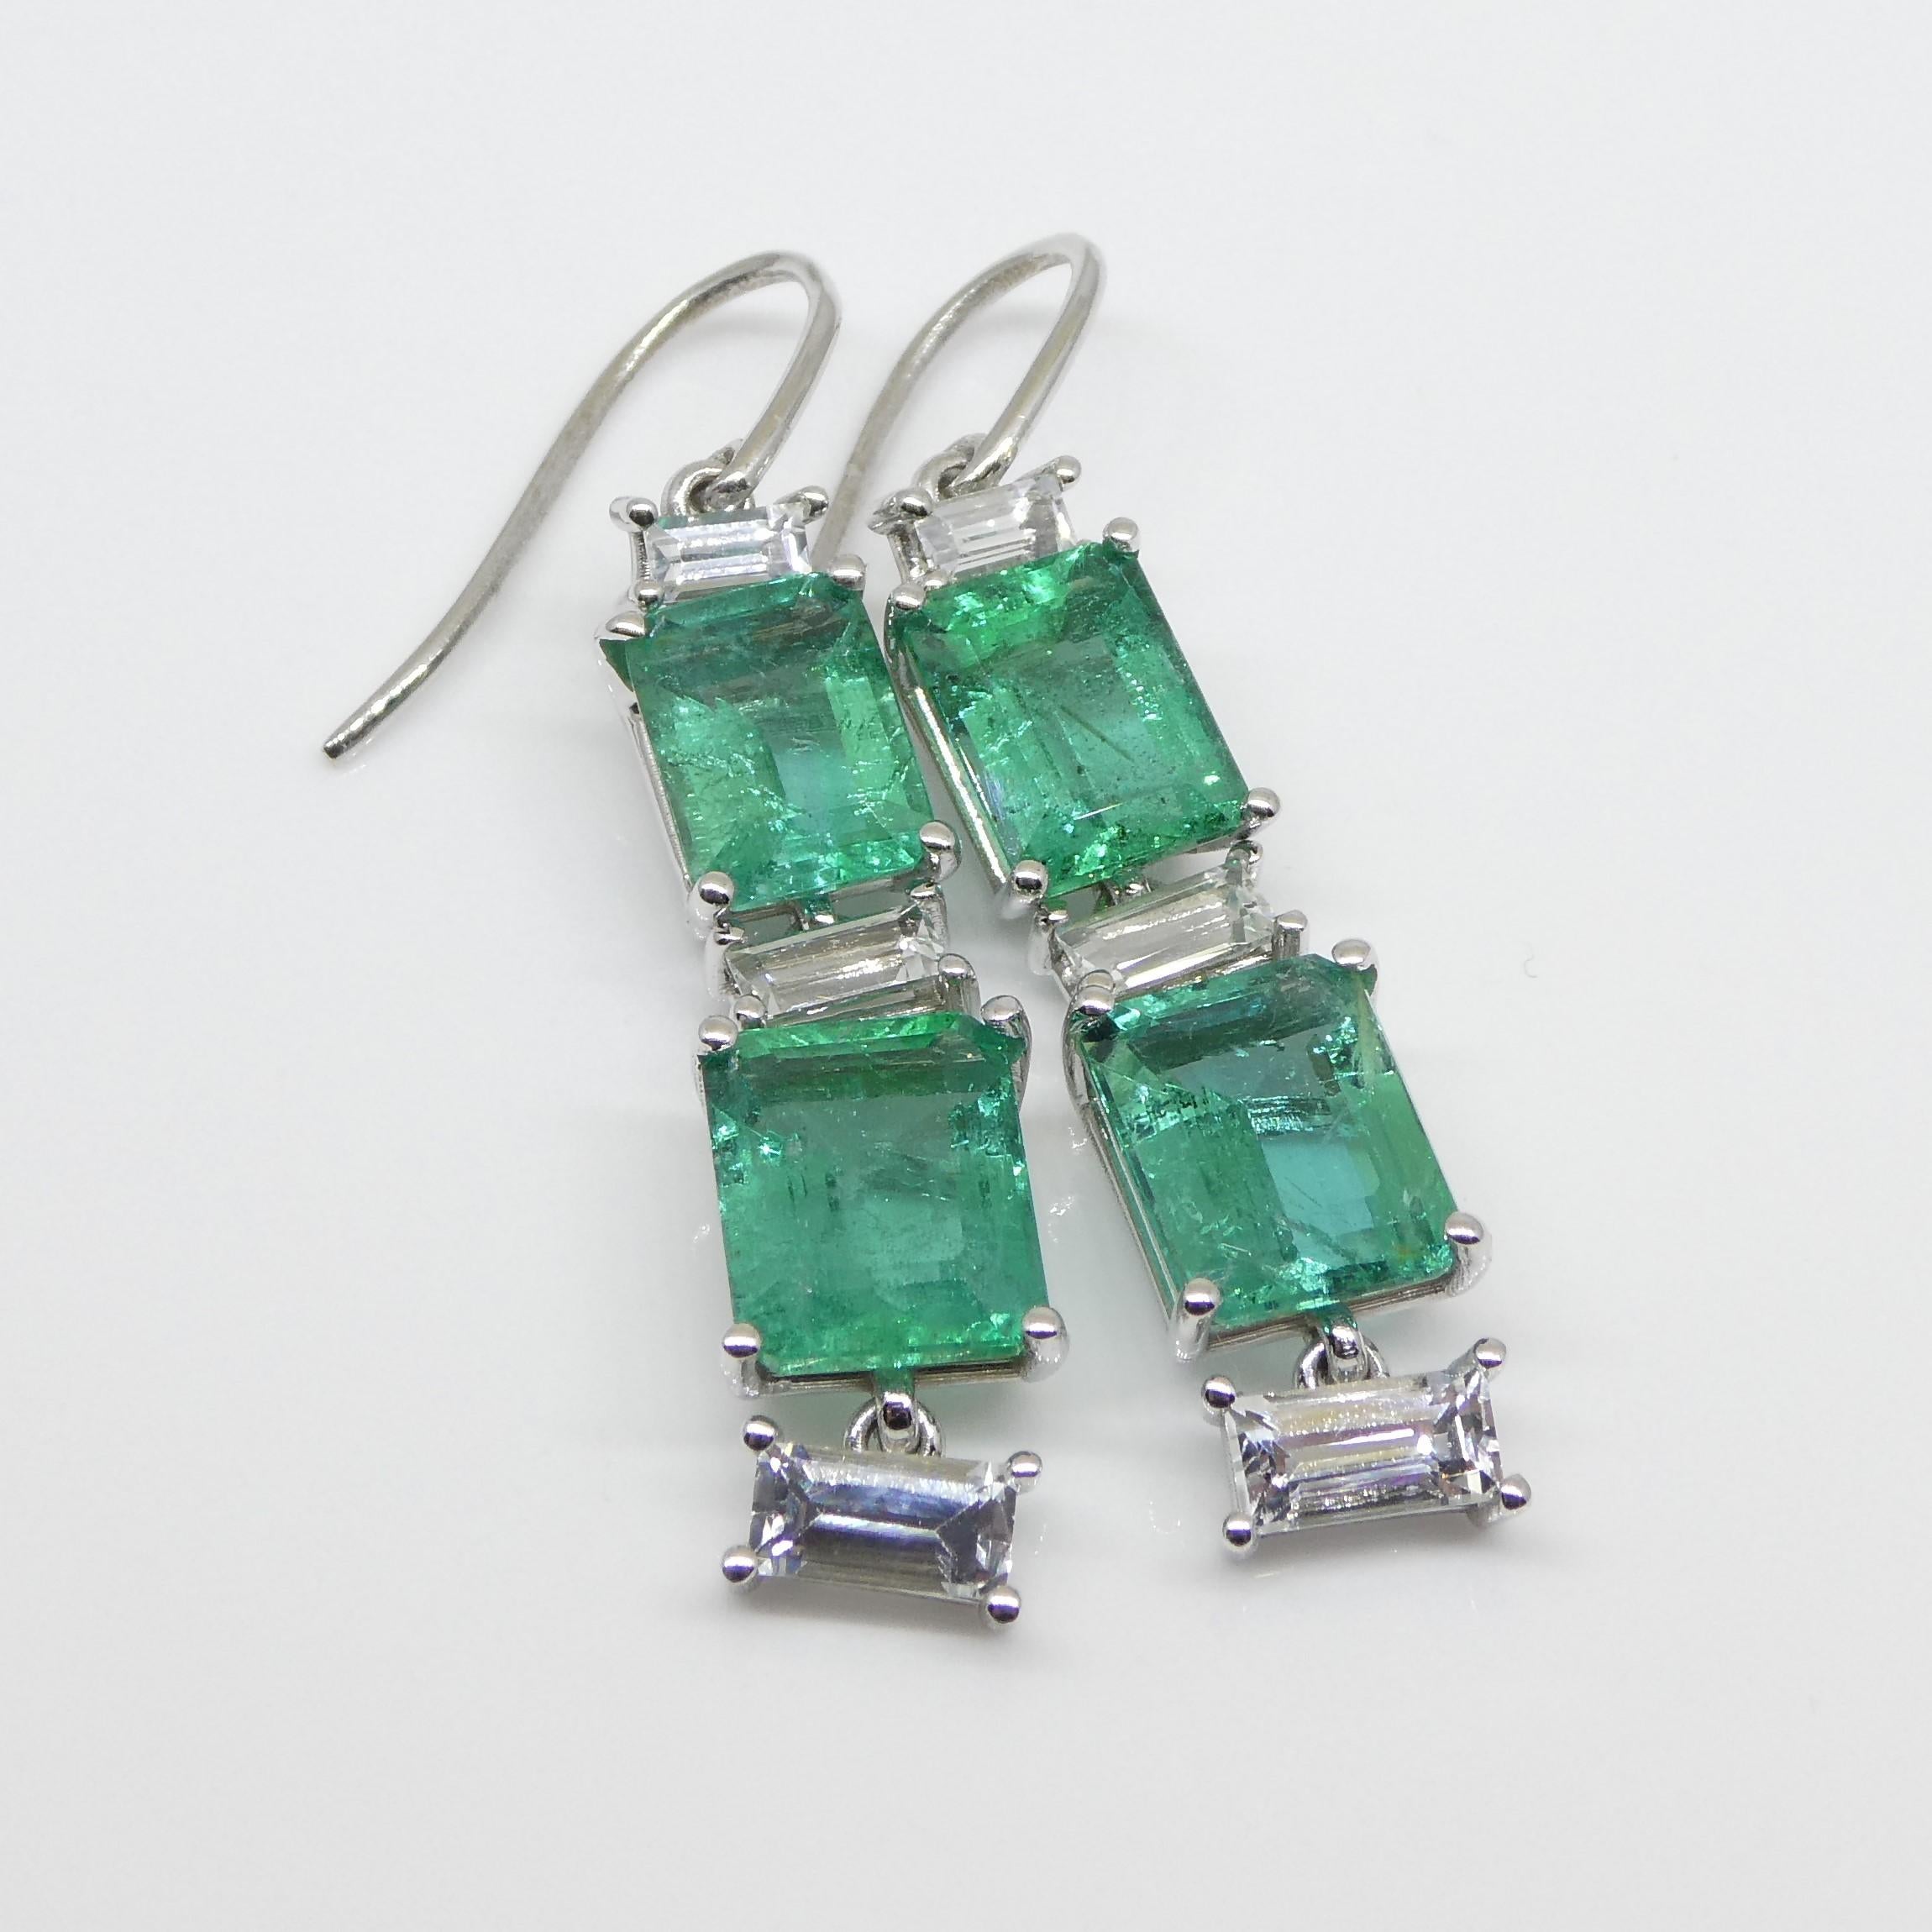 7.80ct Emerald, 1.80ct White Sapphire Earrings in 14k White Gold 12